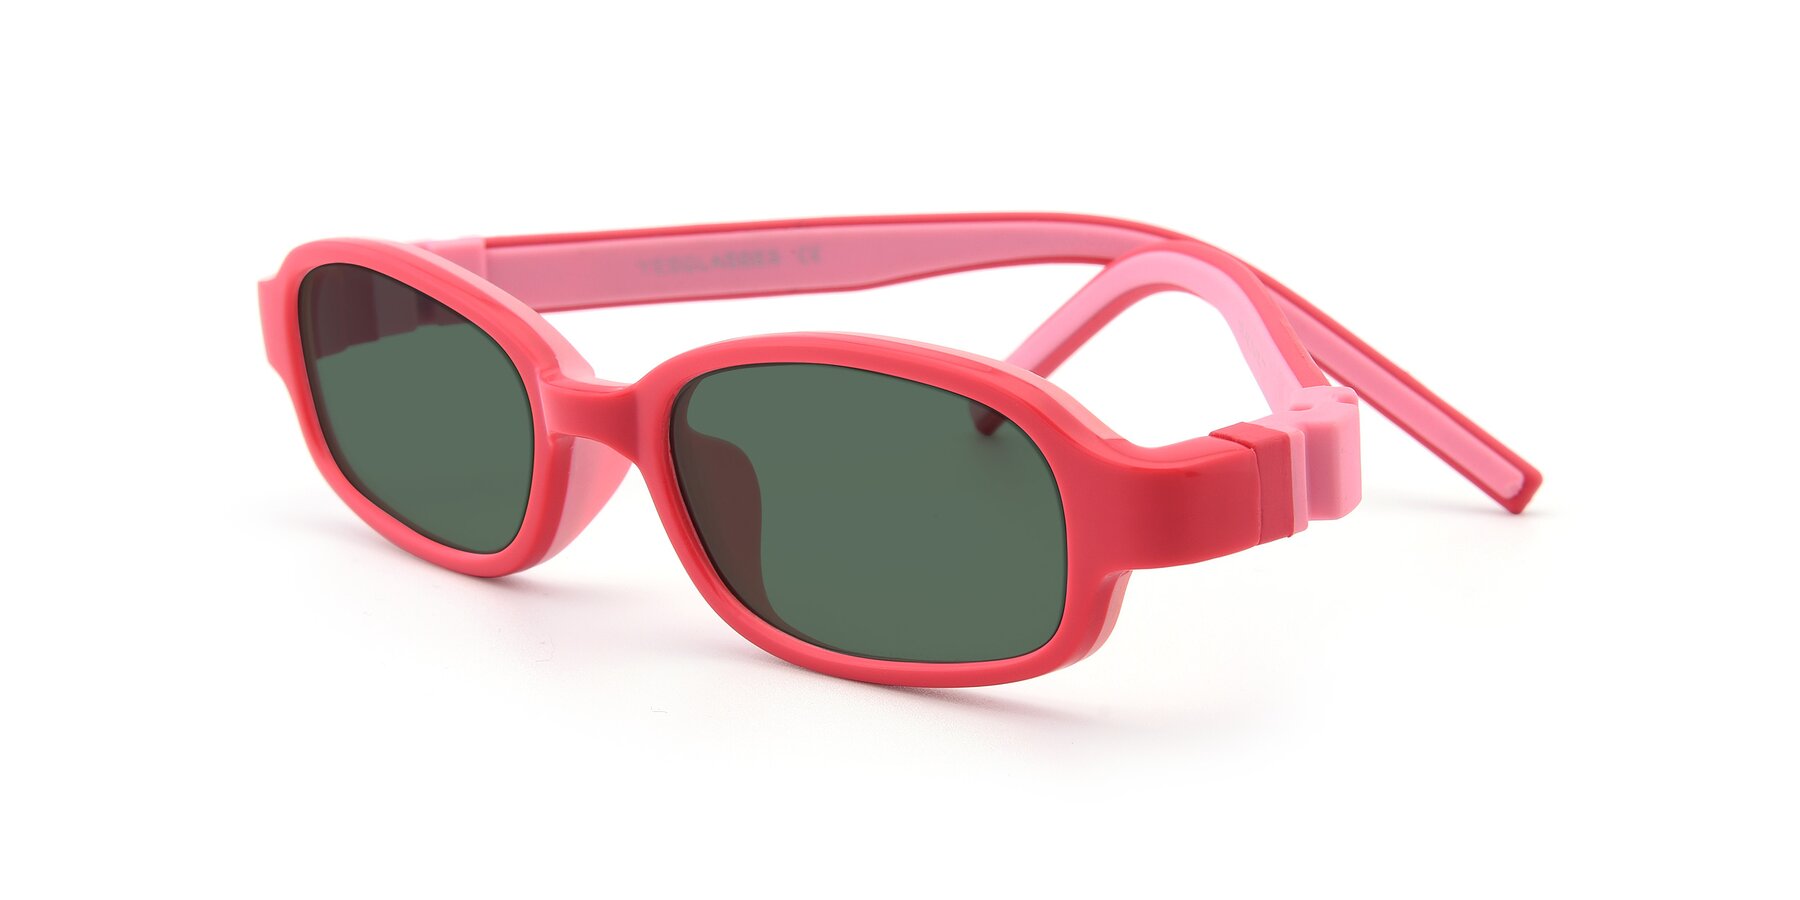 Angle of 515 in Red-Pink with Green Polarized Lenses